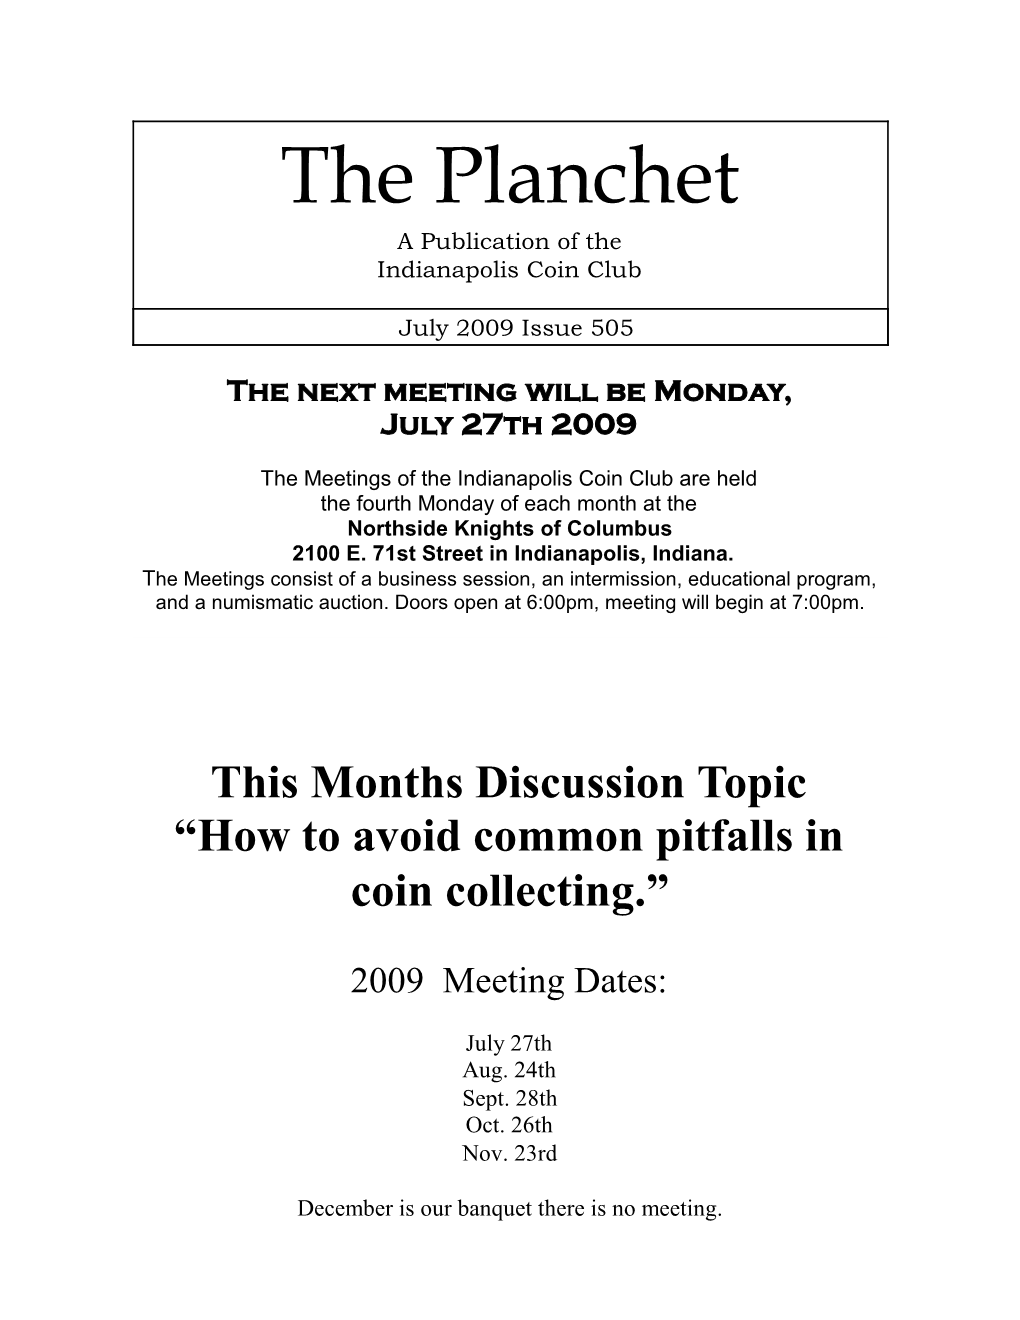 The Planchet a Publication of the Indianapolis Coin Club